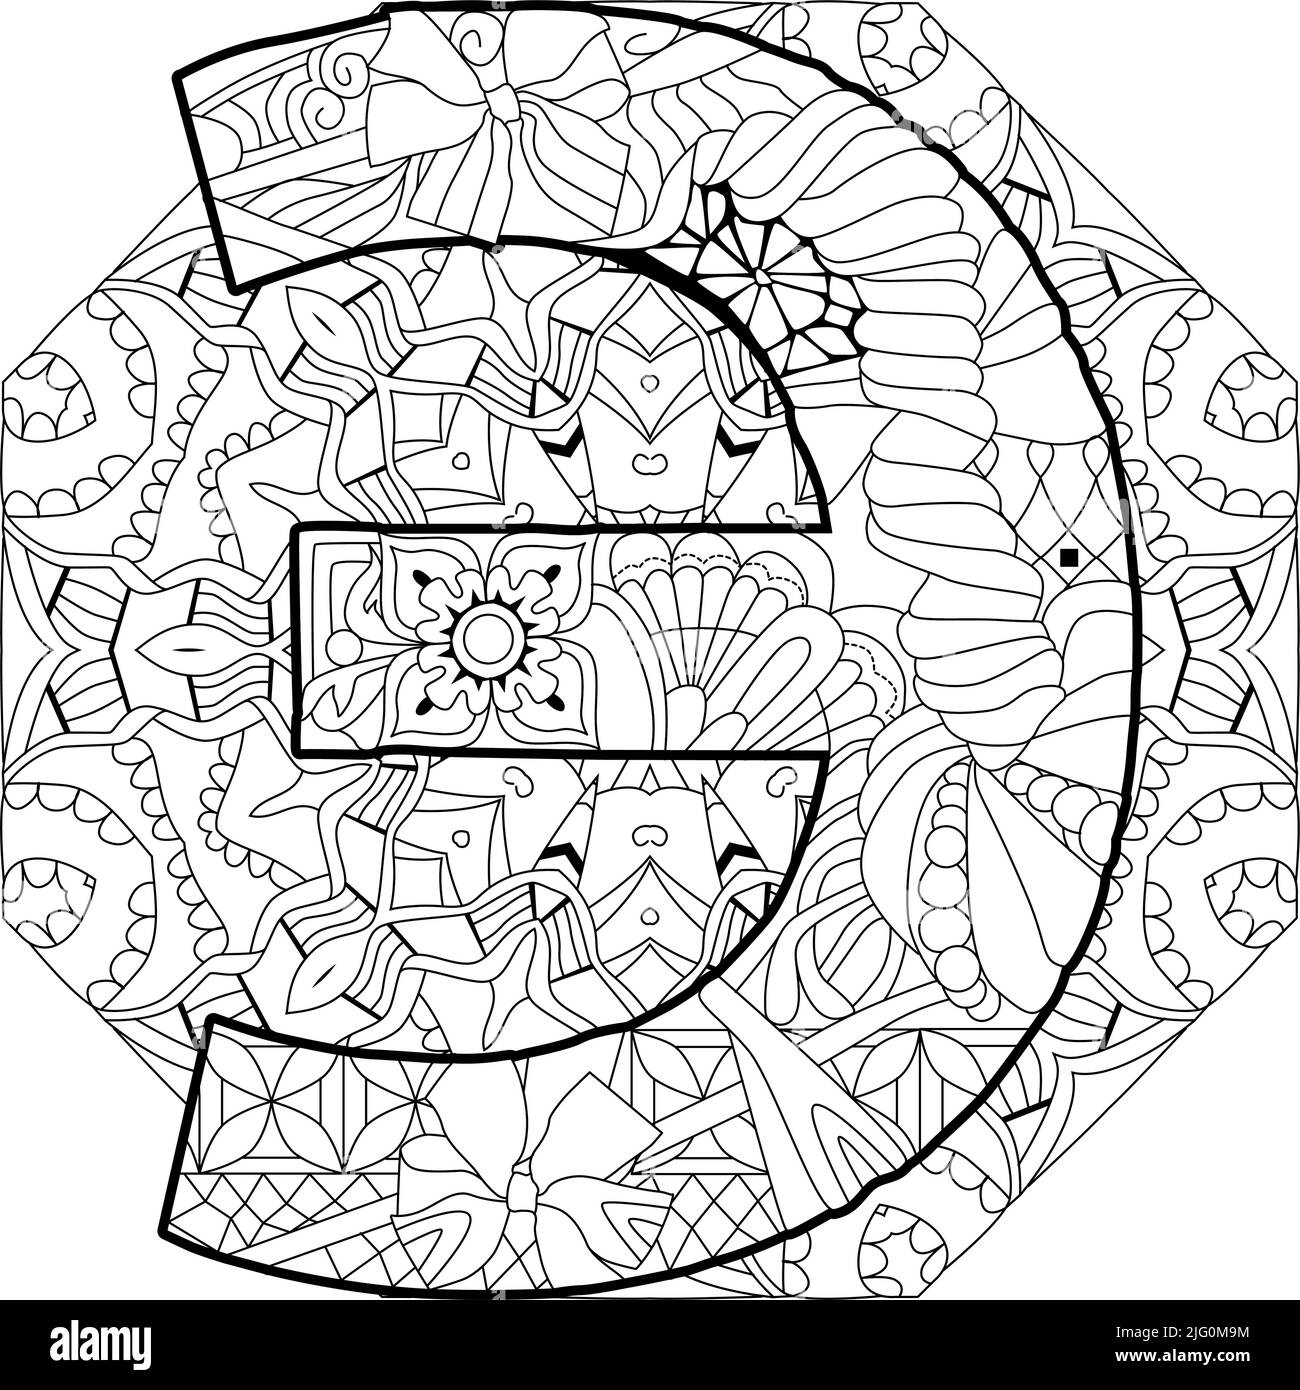 Hand-painted art design. Letter Ey cyrillic zentangle object on mandala for coloring. Stock Vector